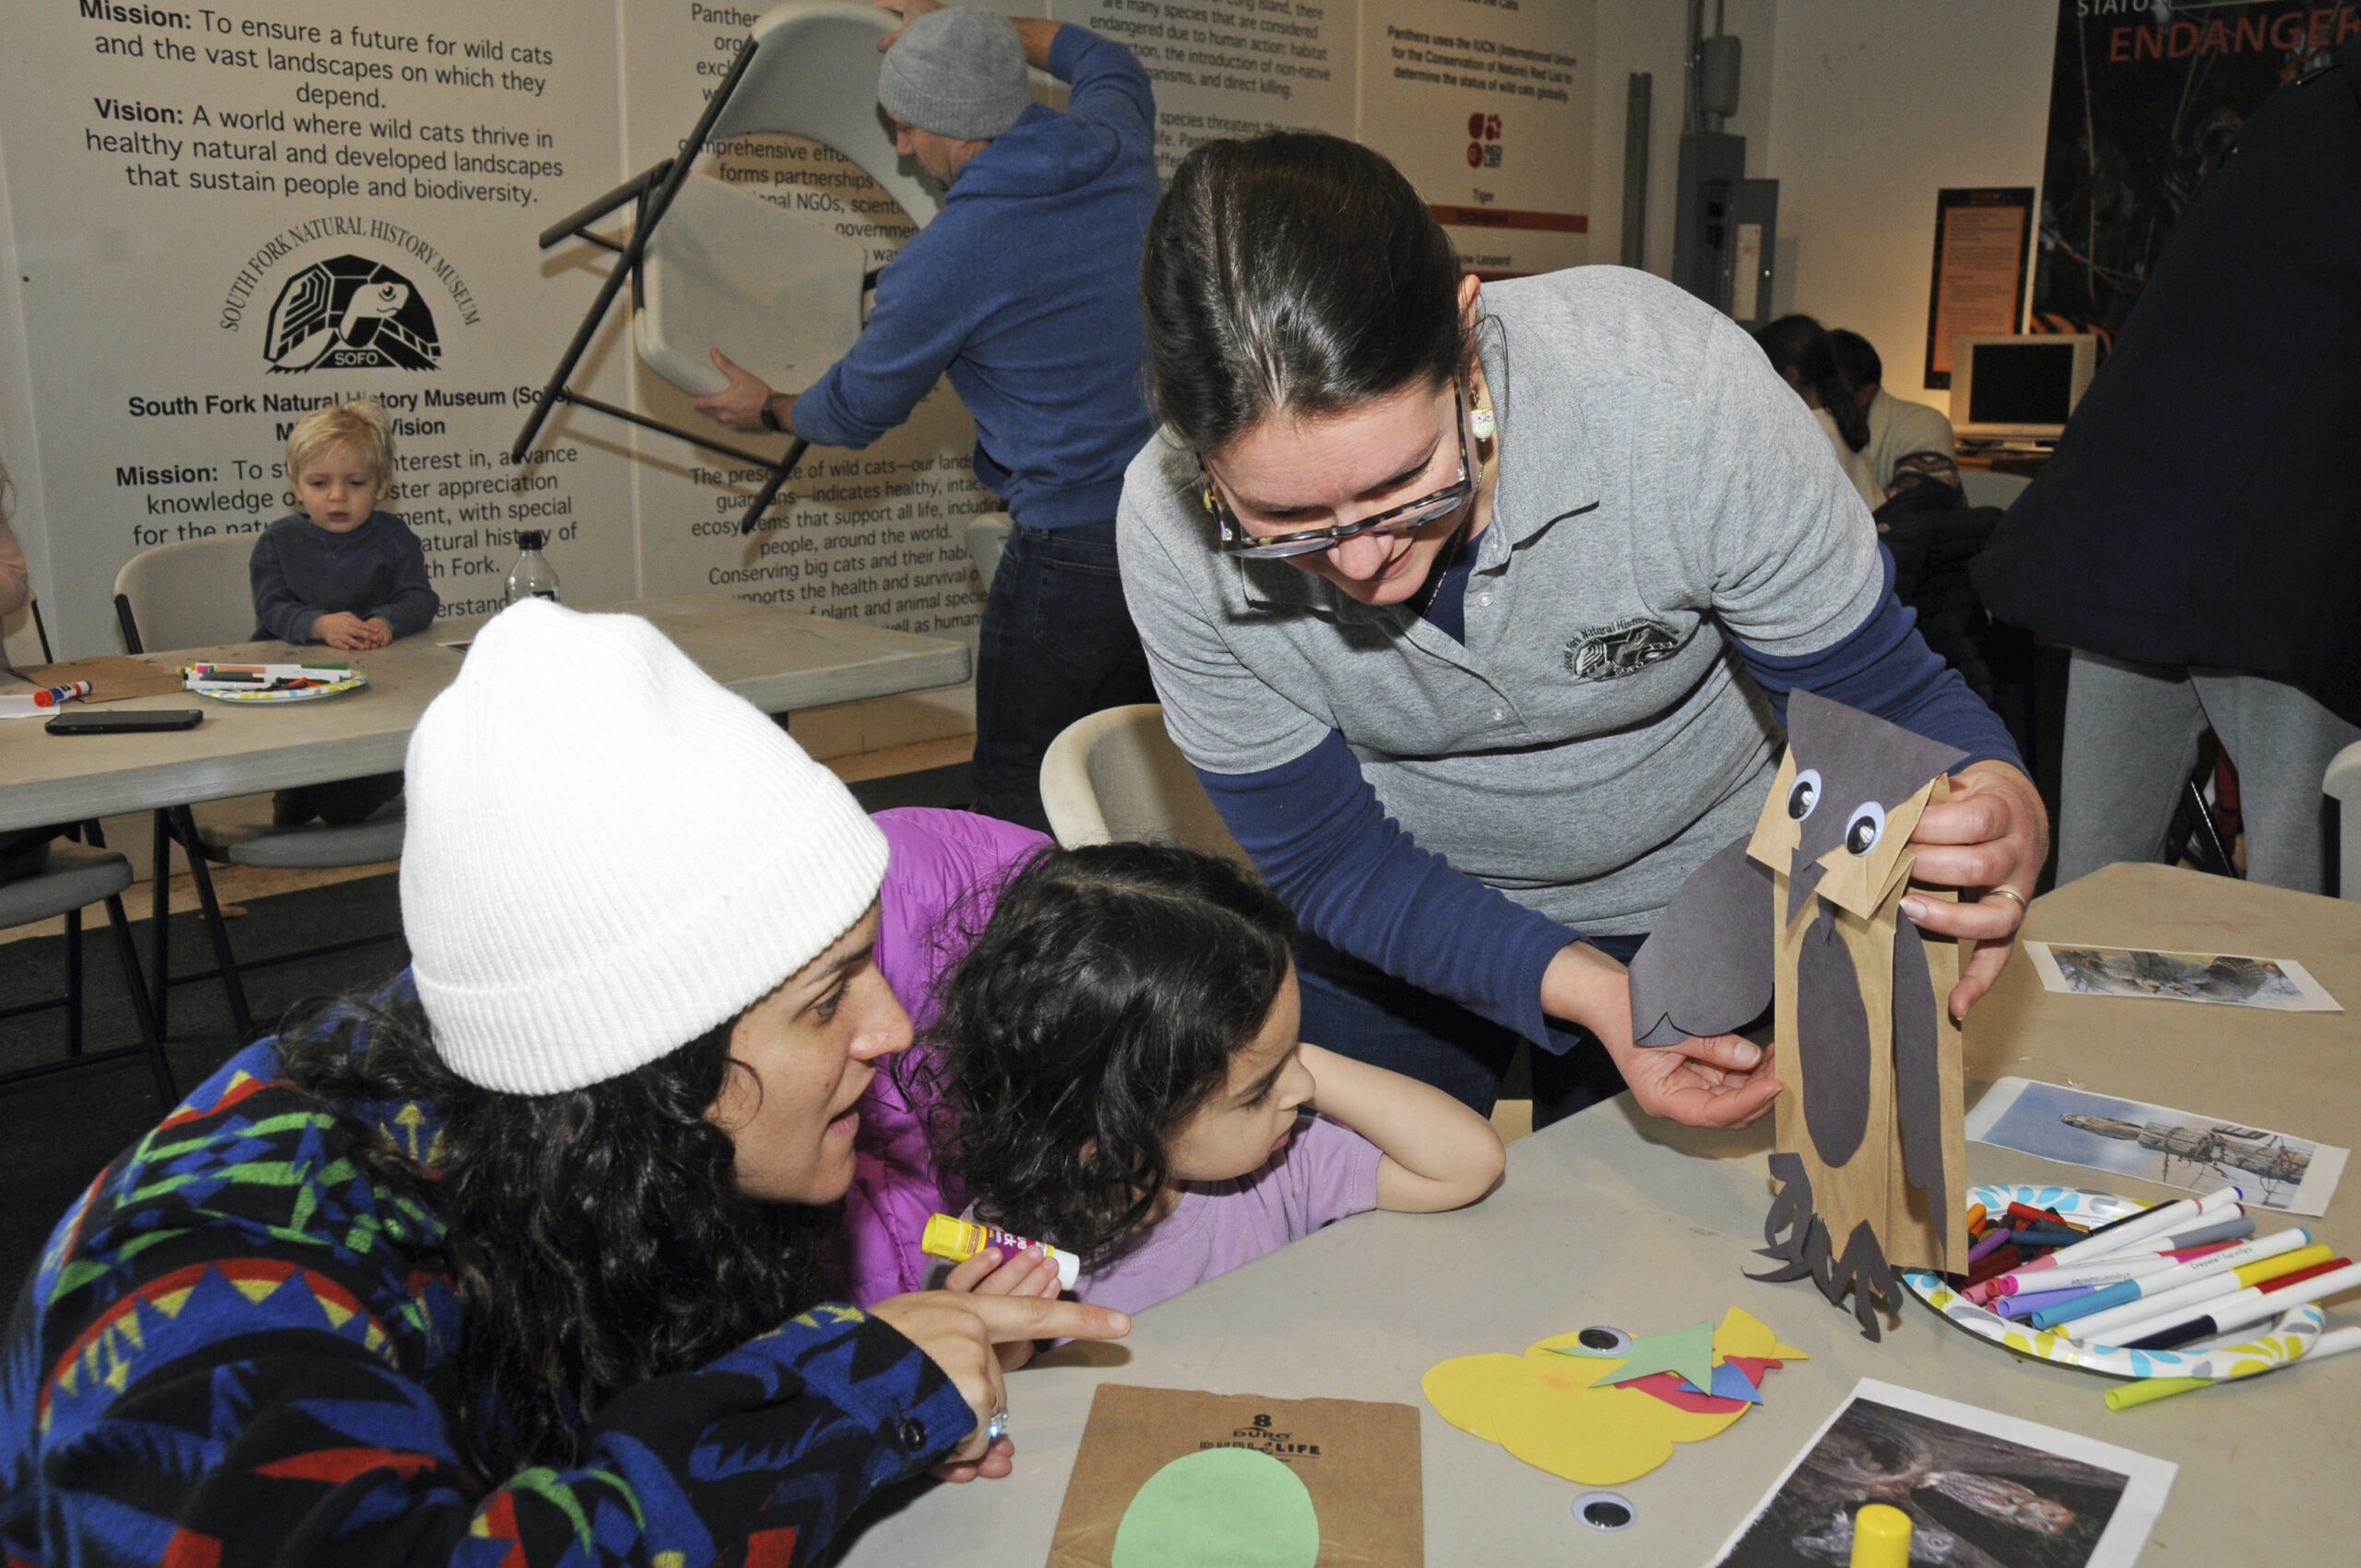 Blair and Charley Dver, along SoFo Membership Associate and Environmental Educator Crystal Possehl-Oakes work on an owl craft at the South Fork Natural History Museum in Bridgehampton on Sunday afternoon. Possehl-Oakes familiarized toddlers and parents with the lives of owls at 